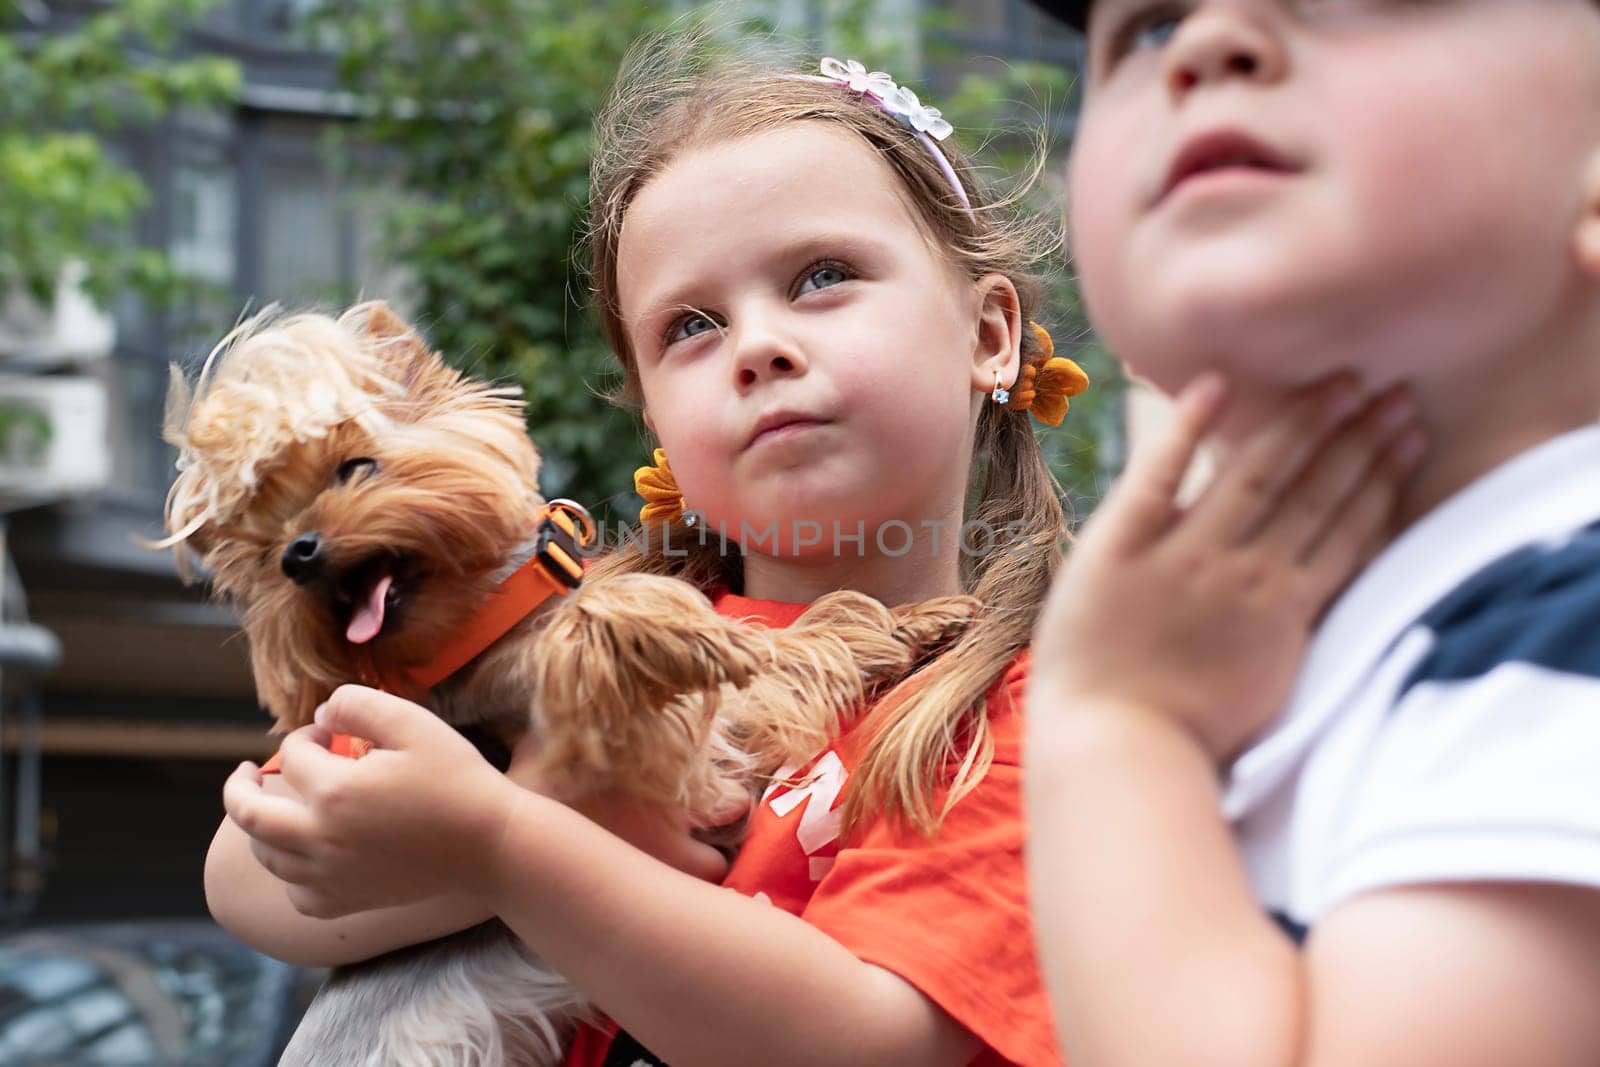 A boy and a girl of 5 years old are playing with a small dog of the Chihuahua breed outside in the yard in summer. The girl tightly hugs and holds a dwarf dog in her arms. Close-up.